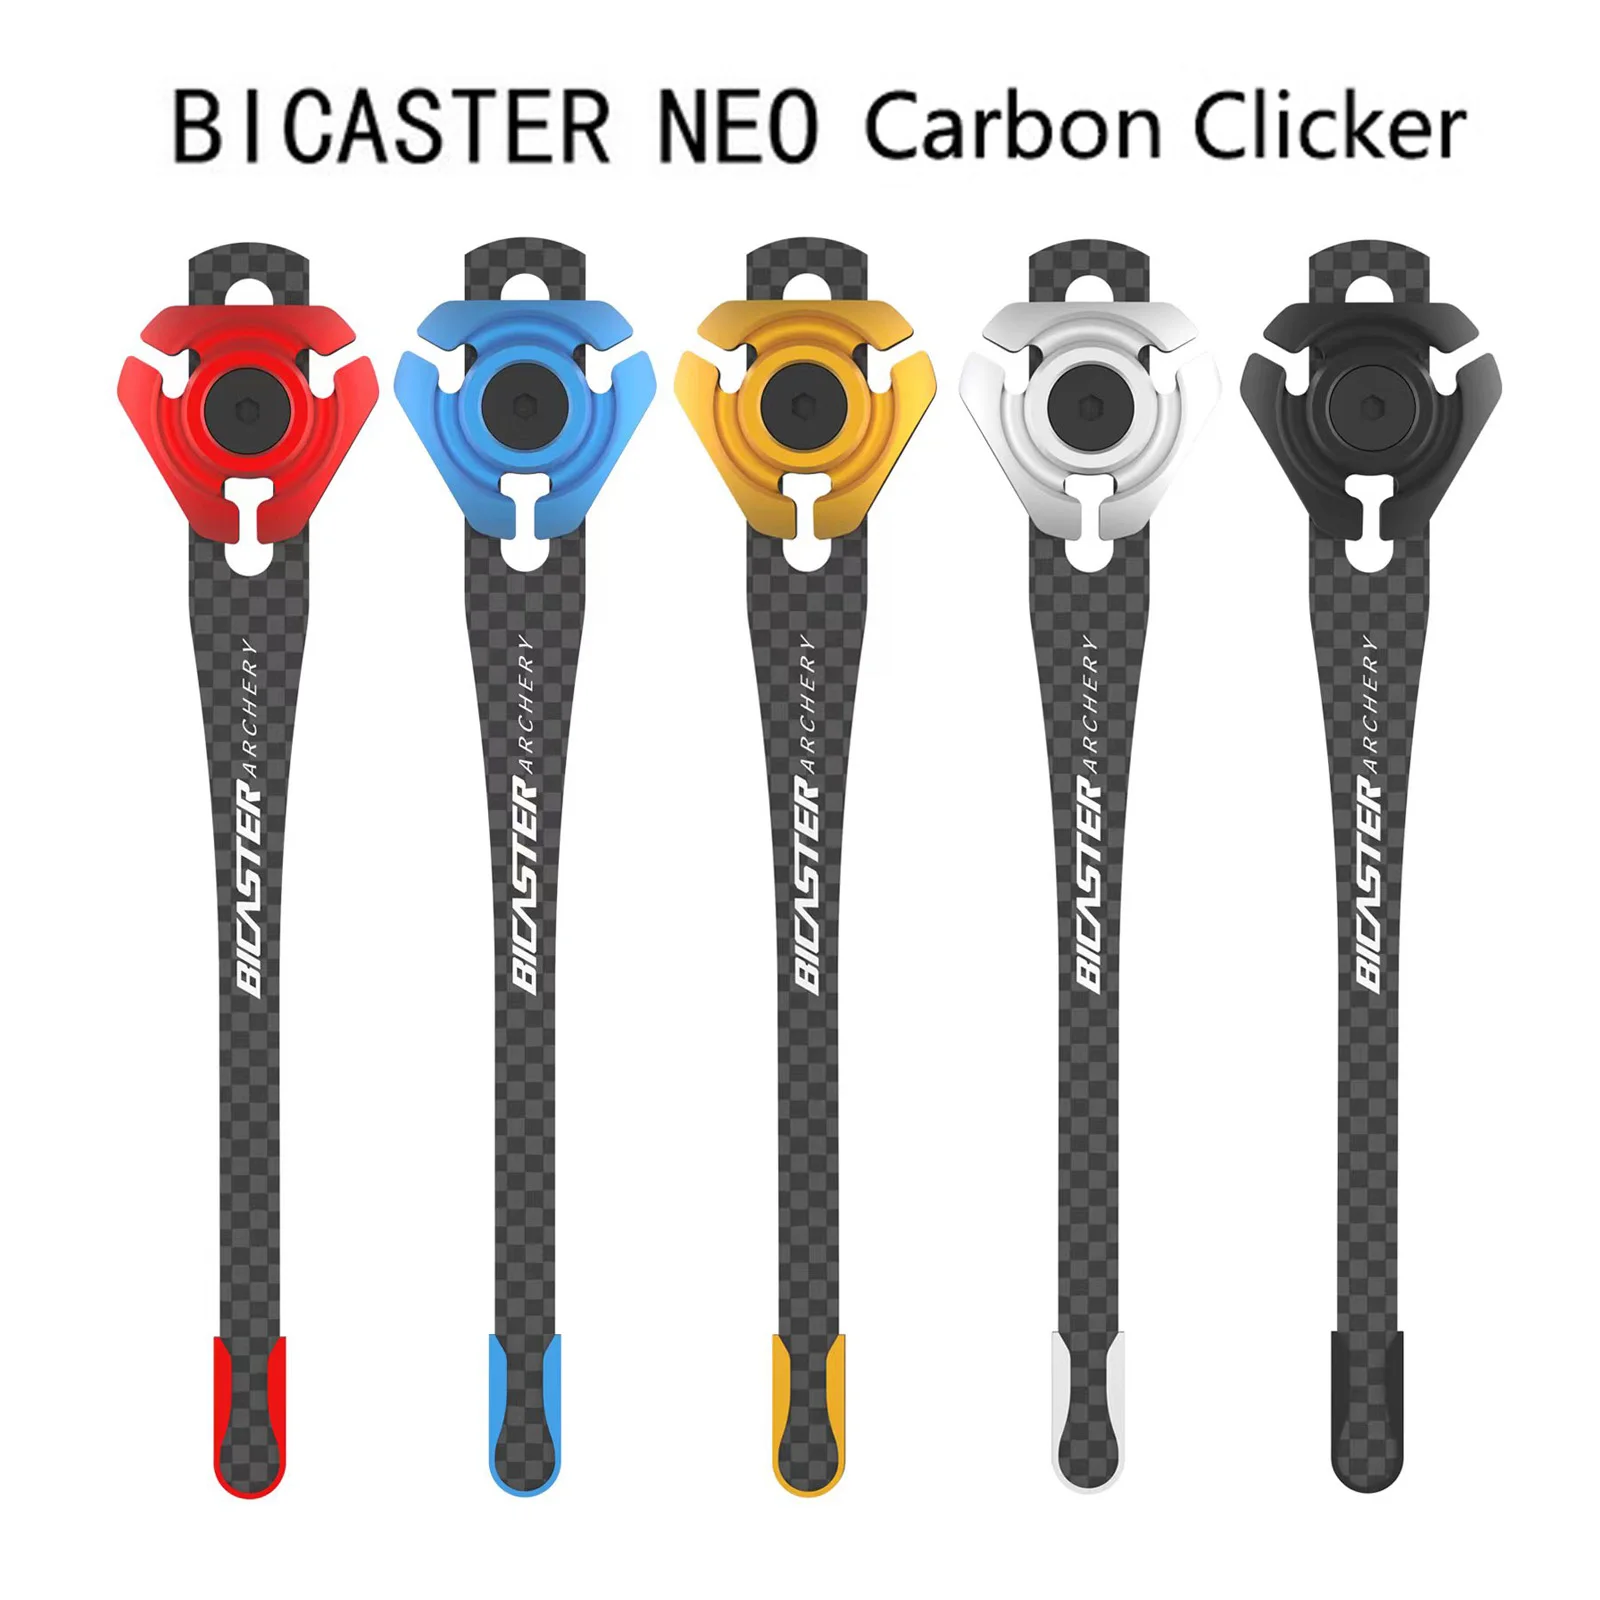 

BICASTER NEO Archery Carbon Clicker Aluminum + 1K Carbon Bow Signal Sheet 0.6mm Thickness+G1 Sight Stand Clicker Bracket